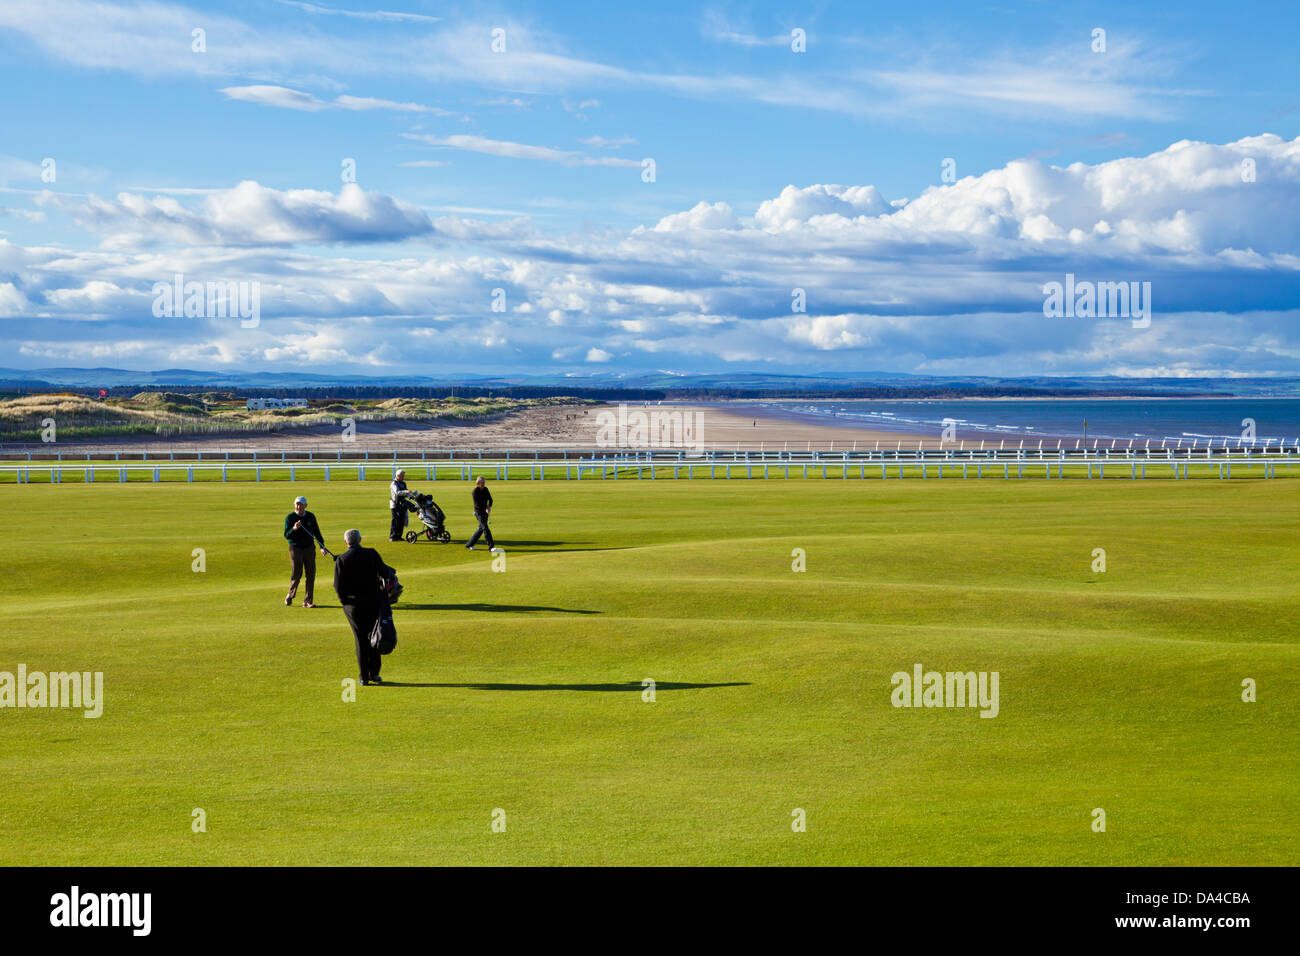 Four golfers playing at The Royal and Ancient Golf Club of St Andrews golf course St Andrews Fife Scotland UK GB EU Europe Stock Photo